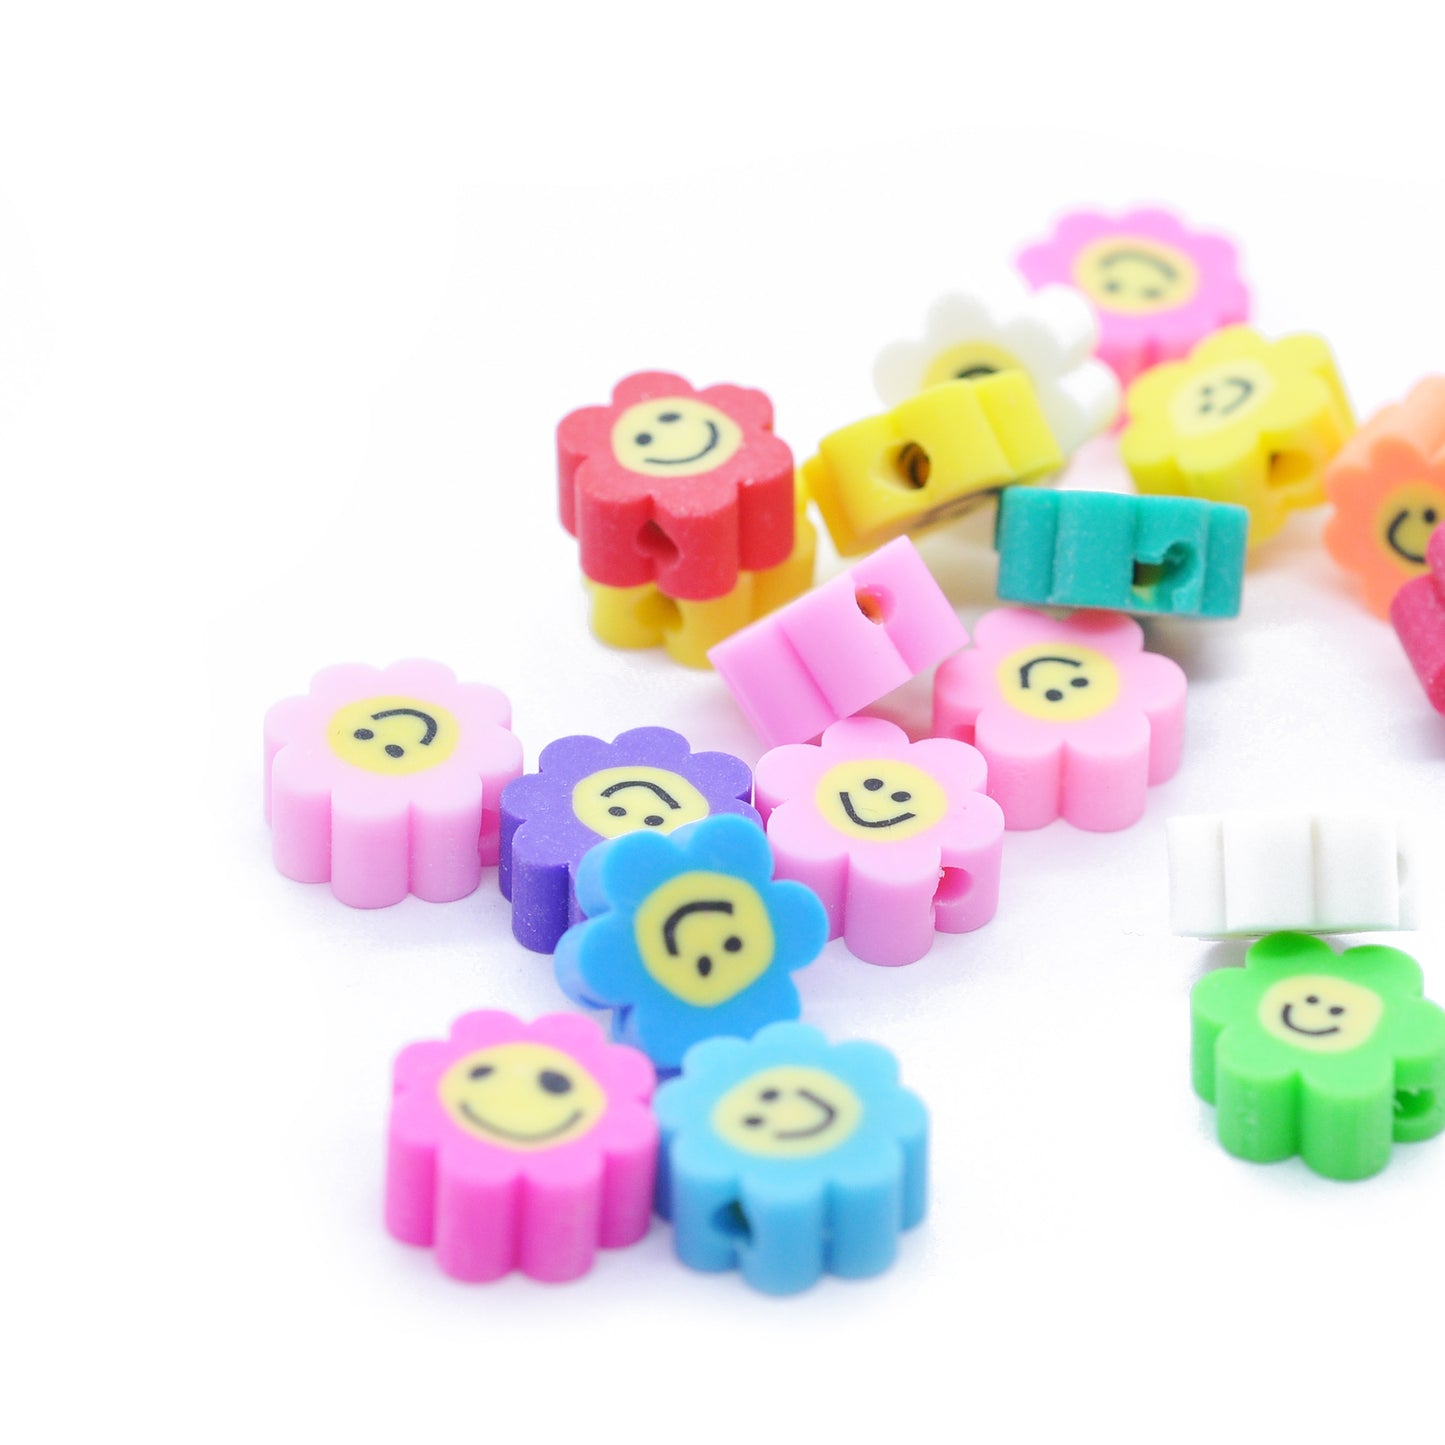 10x Fimo smileys with flower / colorful mix / 10 mm